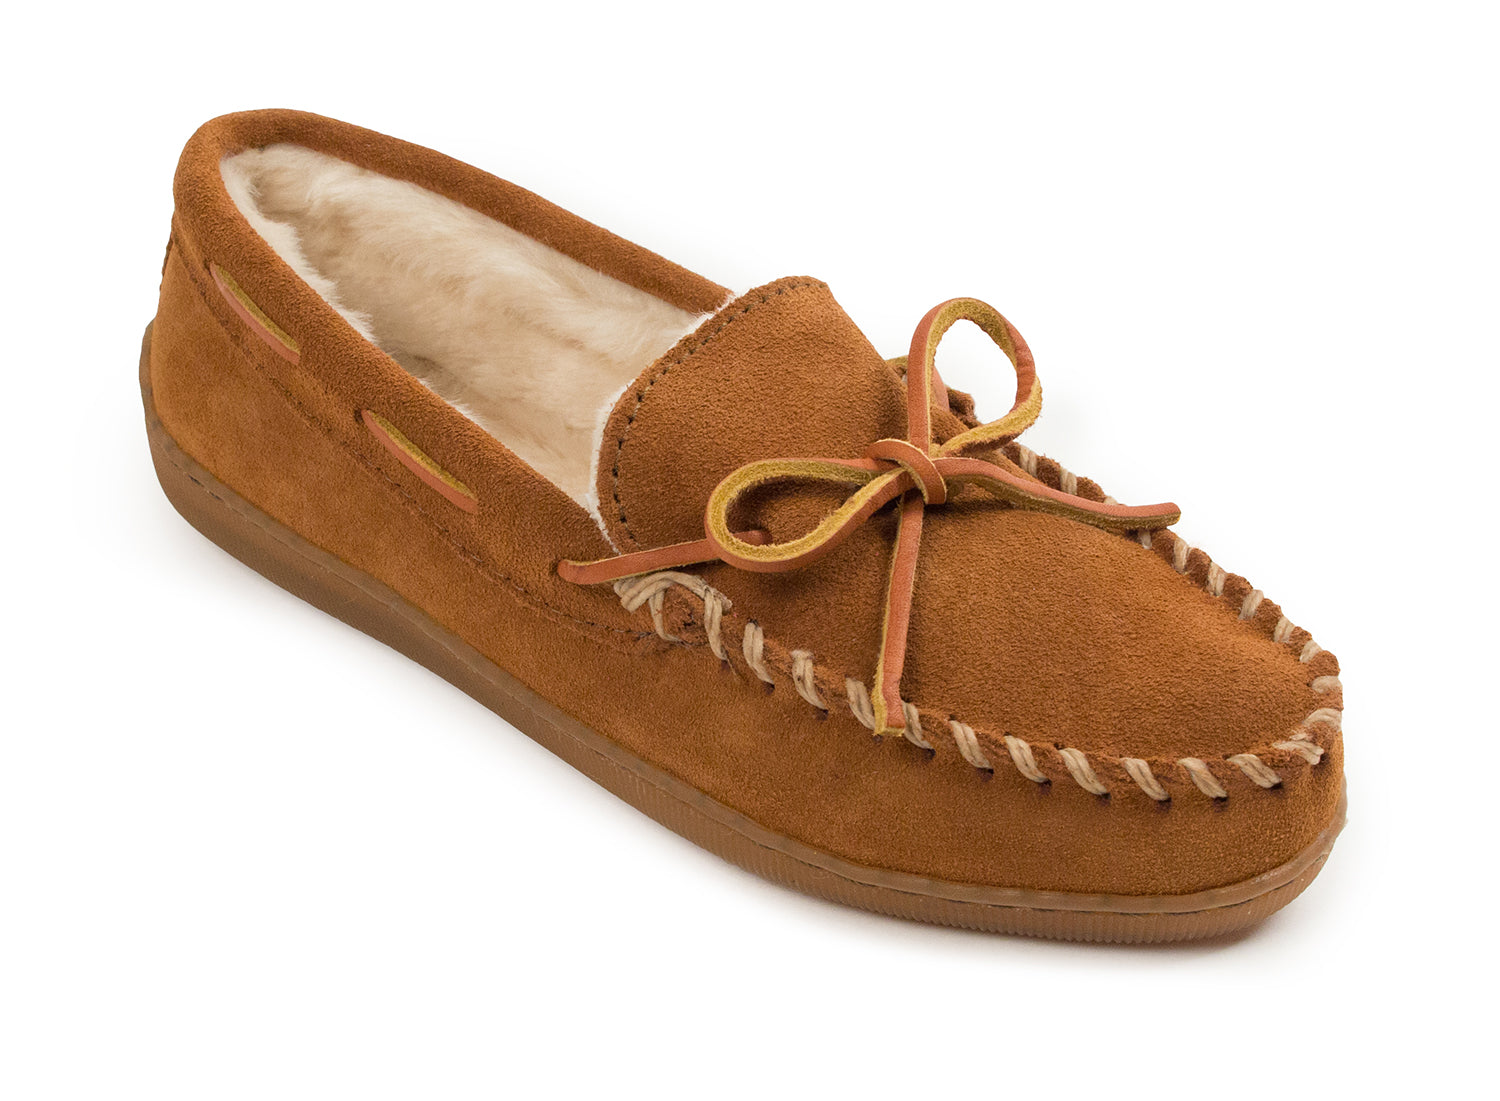 Pile Lined Hardsole Slipper in Brown from 3/4 Angle View